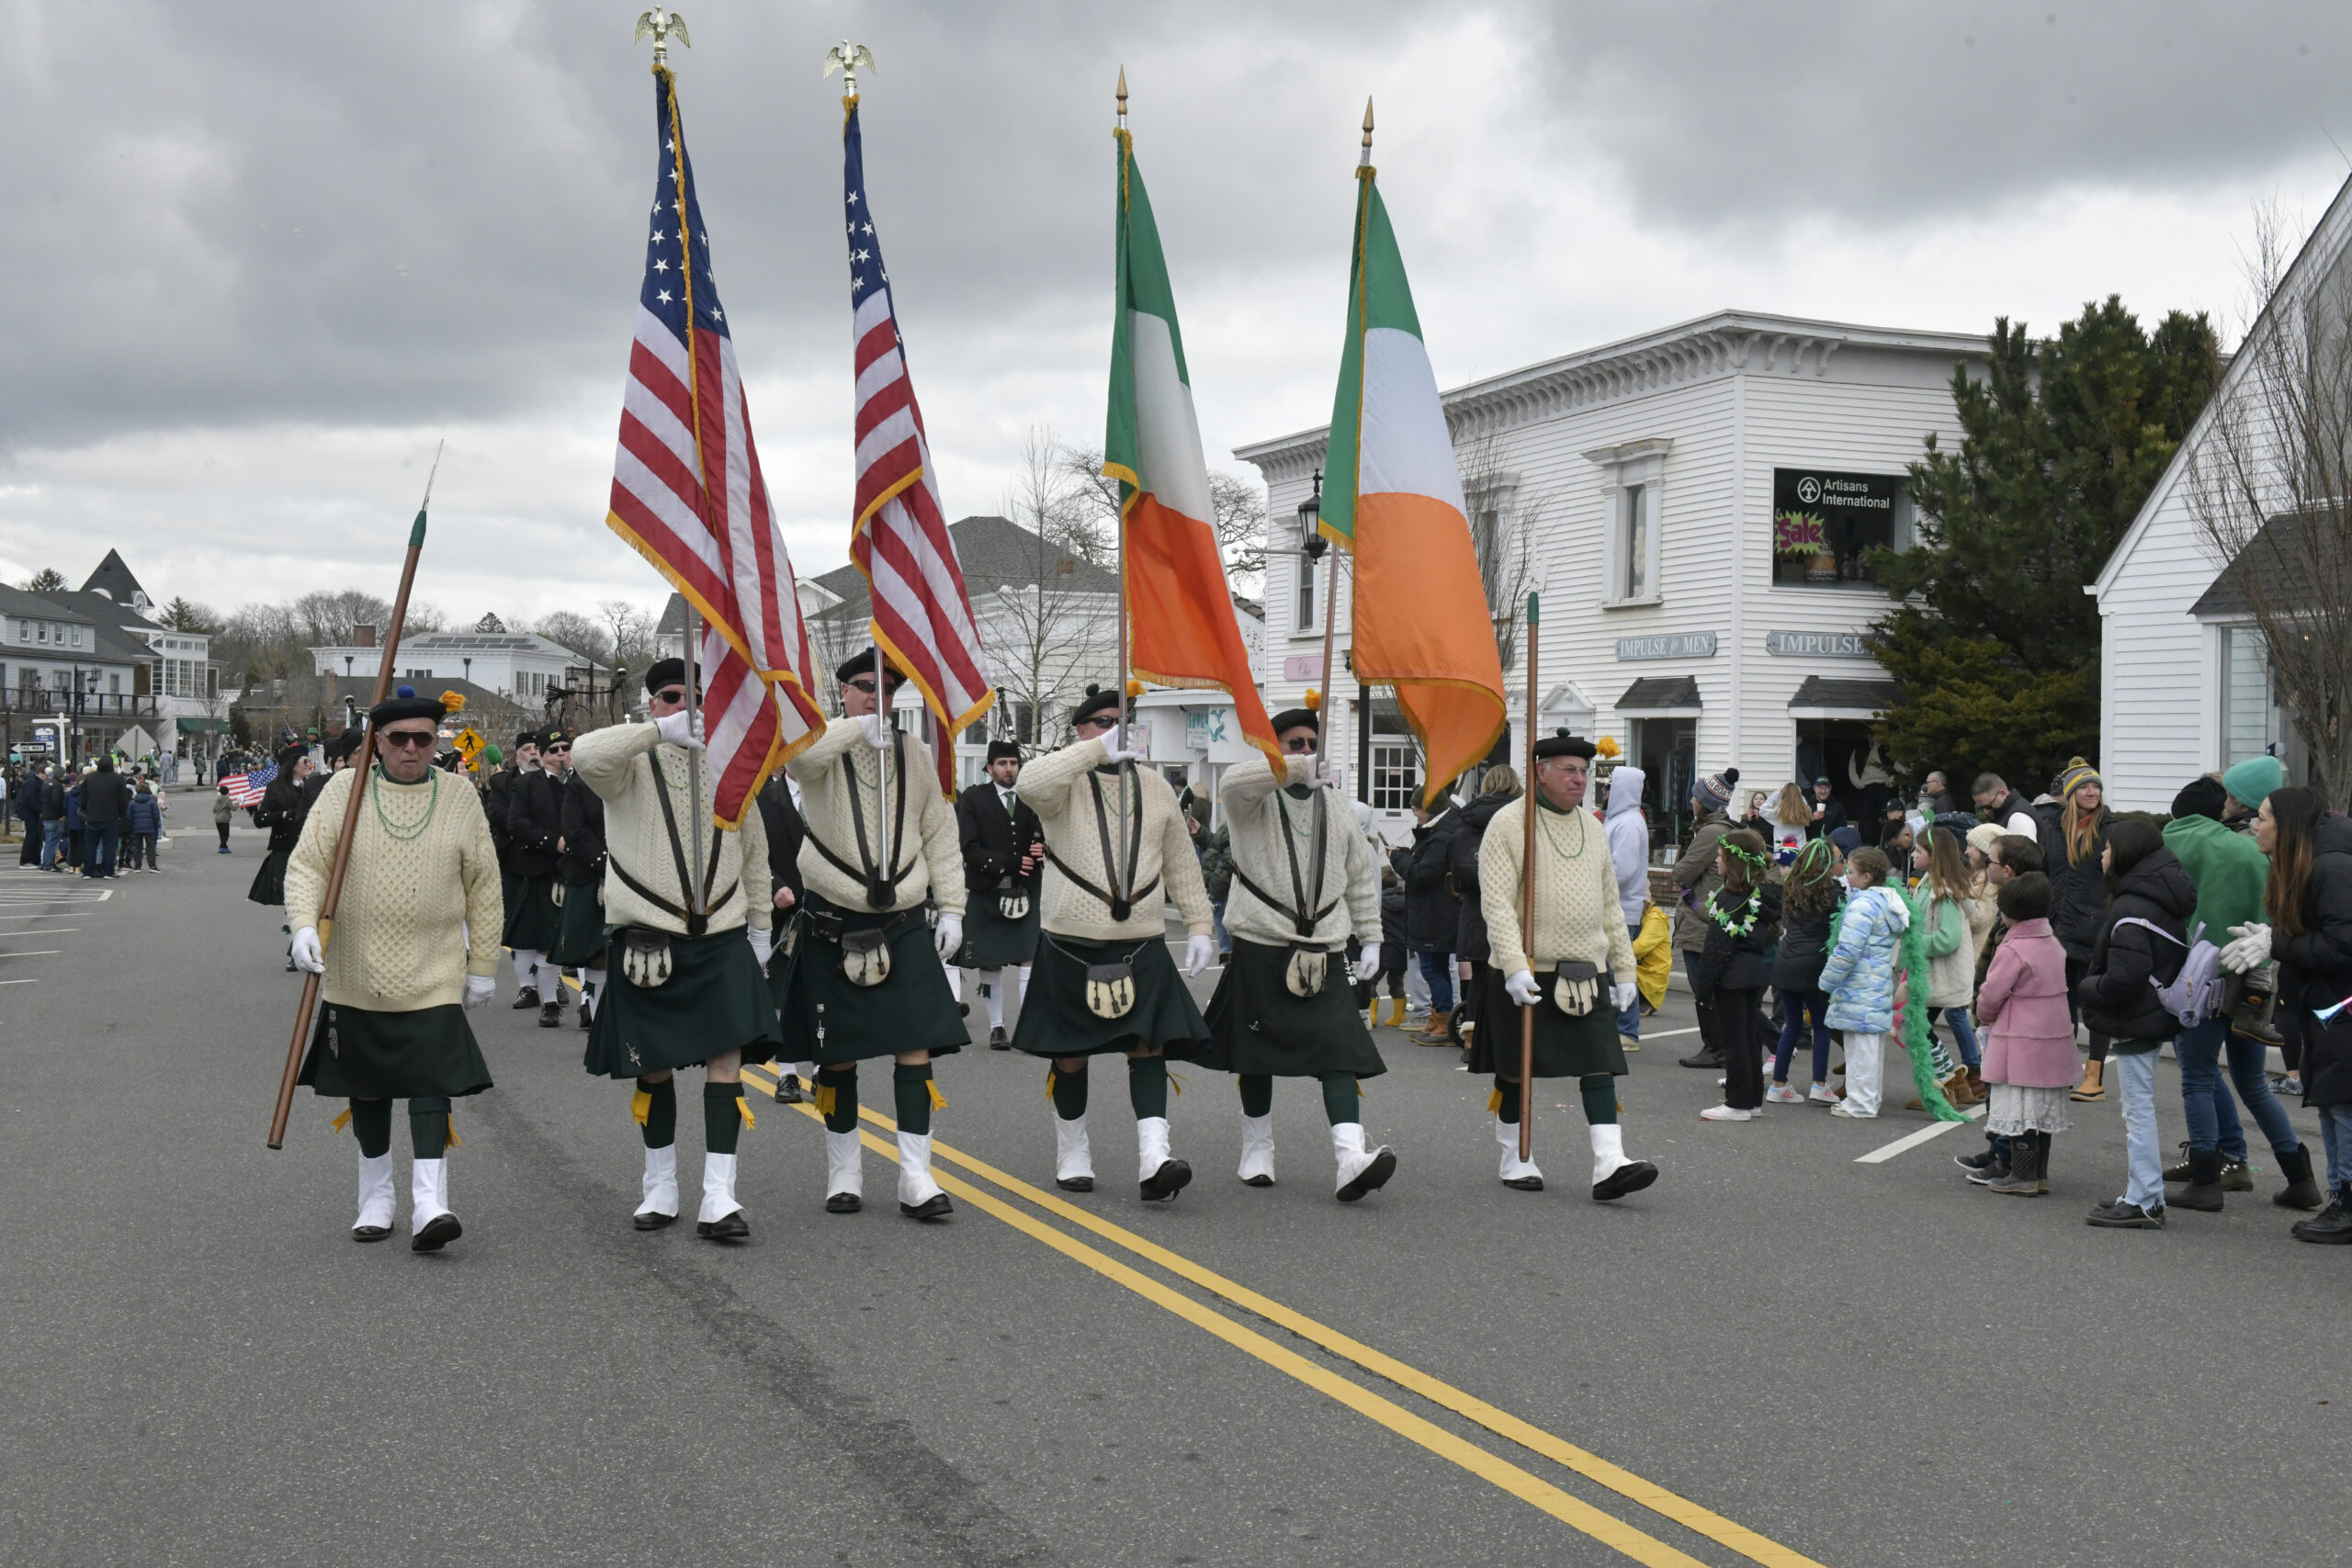 Scenes from the Westhampton Beach St. Patrick's Day Parade on Saturday.